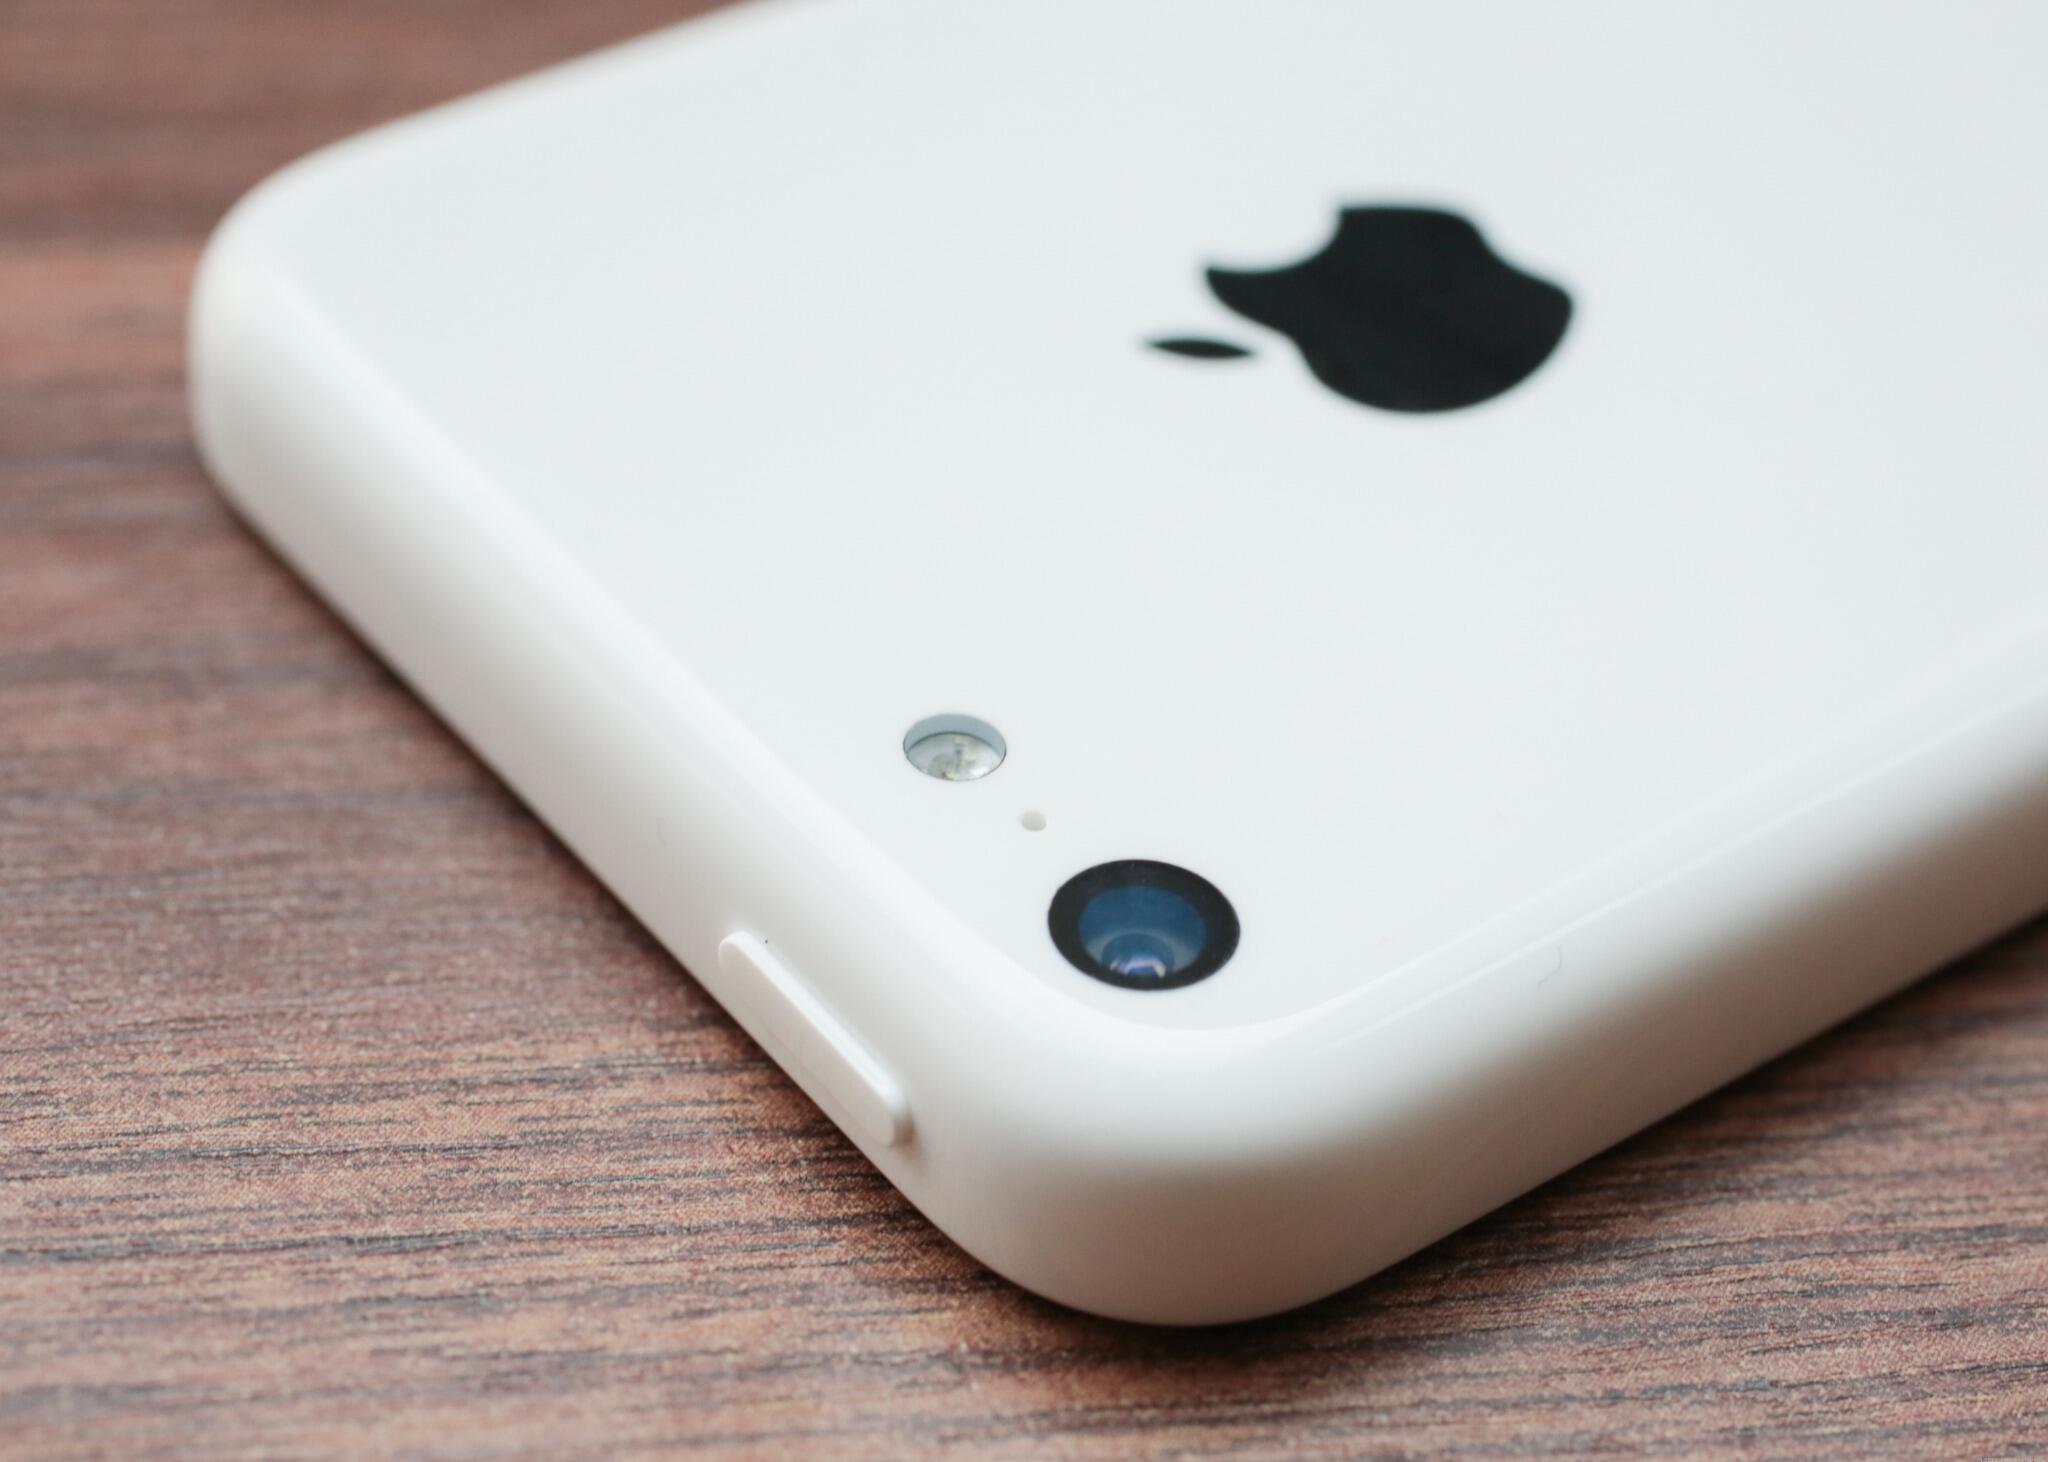 CNET on X: iPhone 5C review: It's the Basic White MacBook of